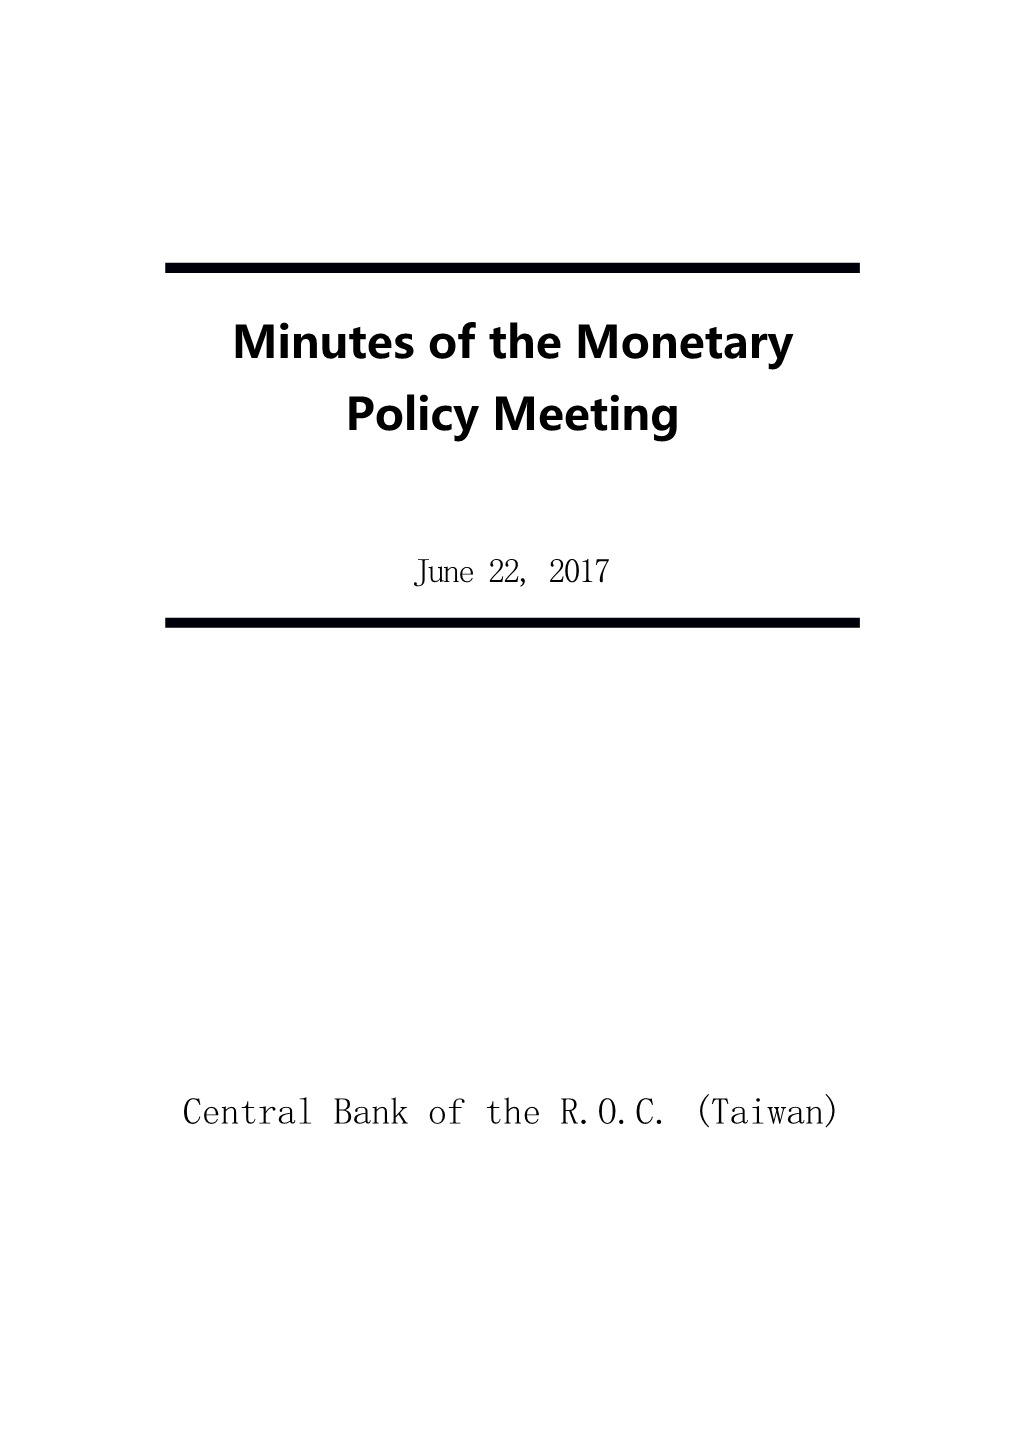 Minutes of the Monetary Policy Meeting